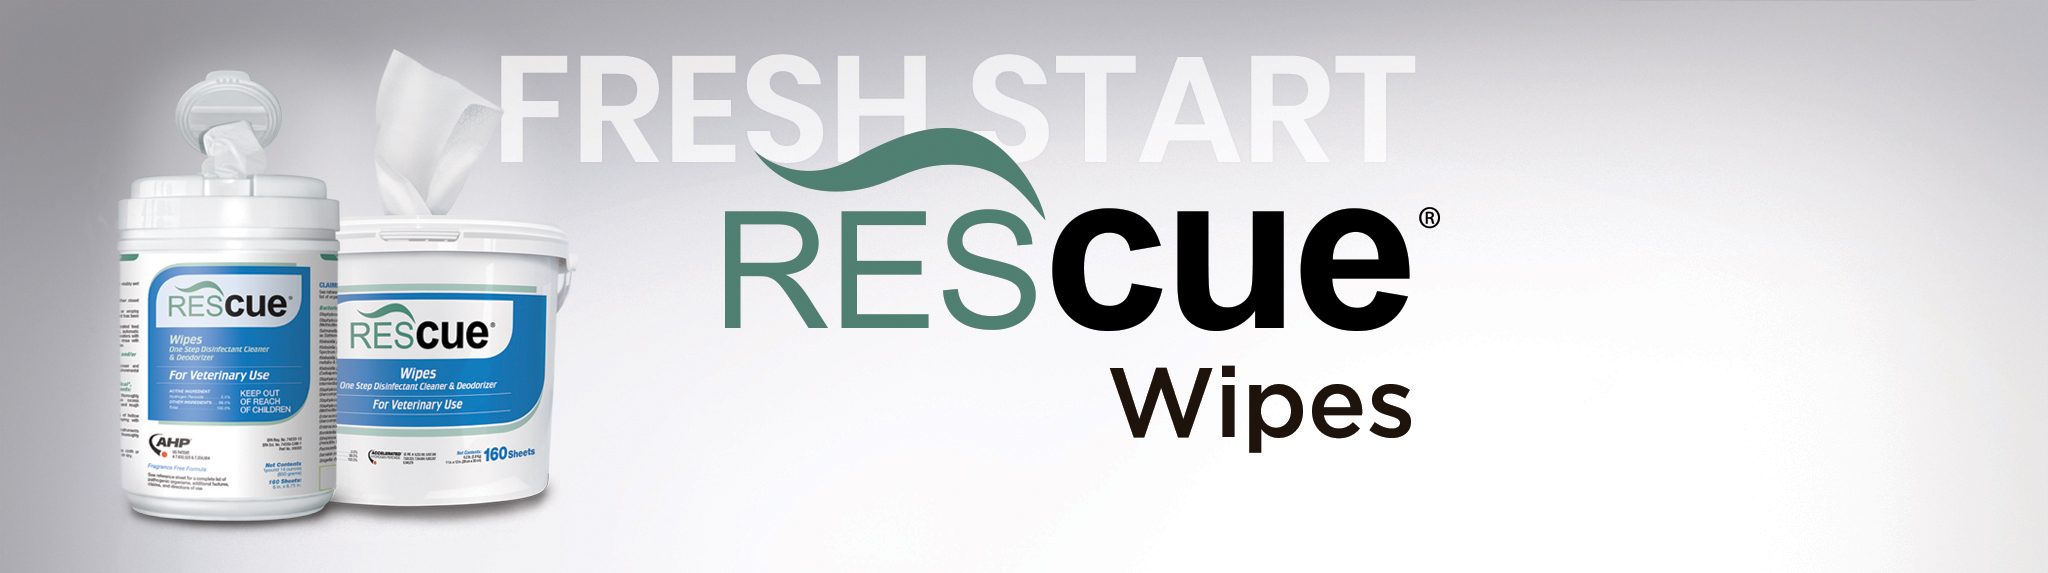 Fresh Start Rescue™ Wipes - Wipes Products